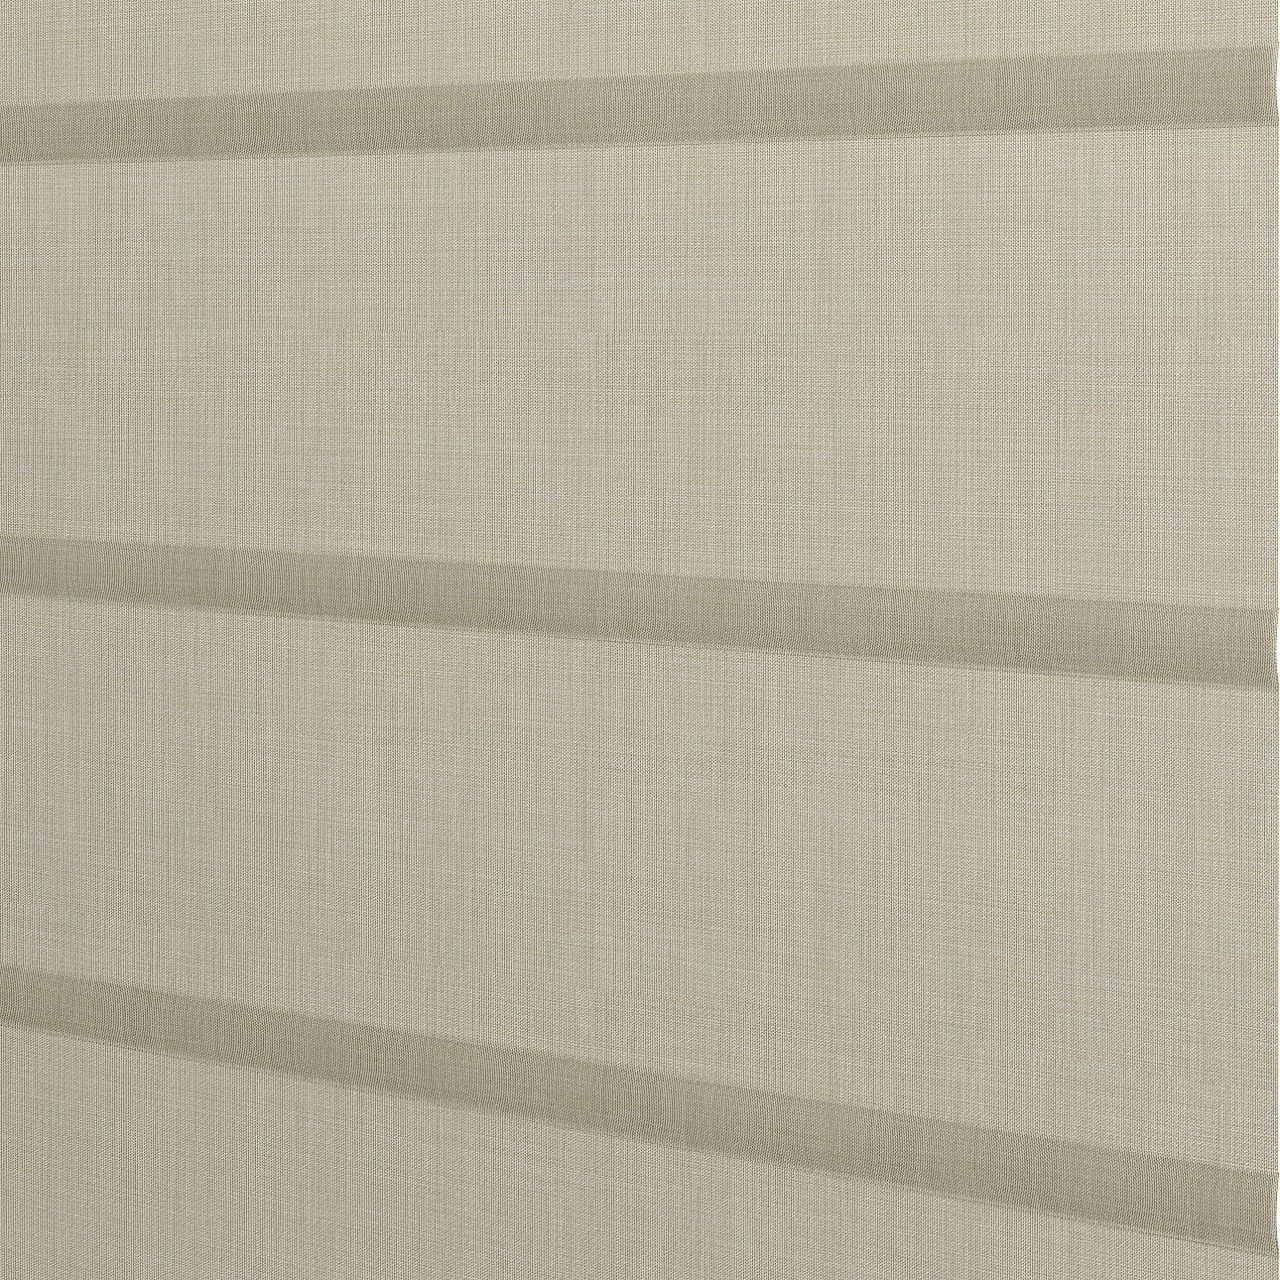 Alustra Architectural Roller Shades